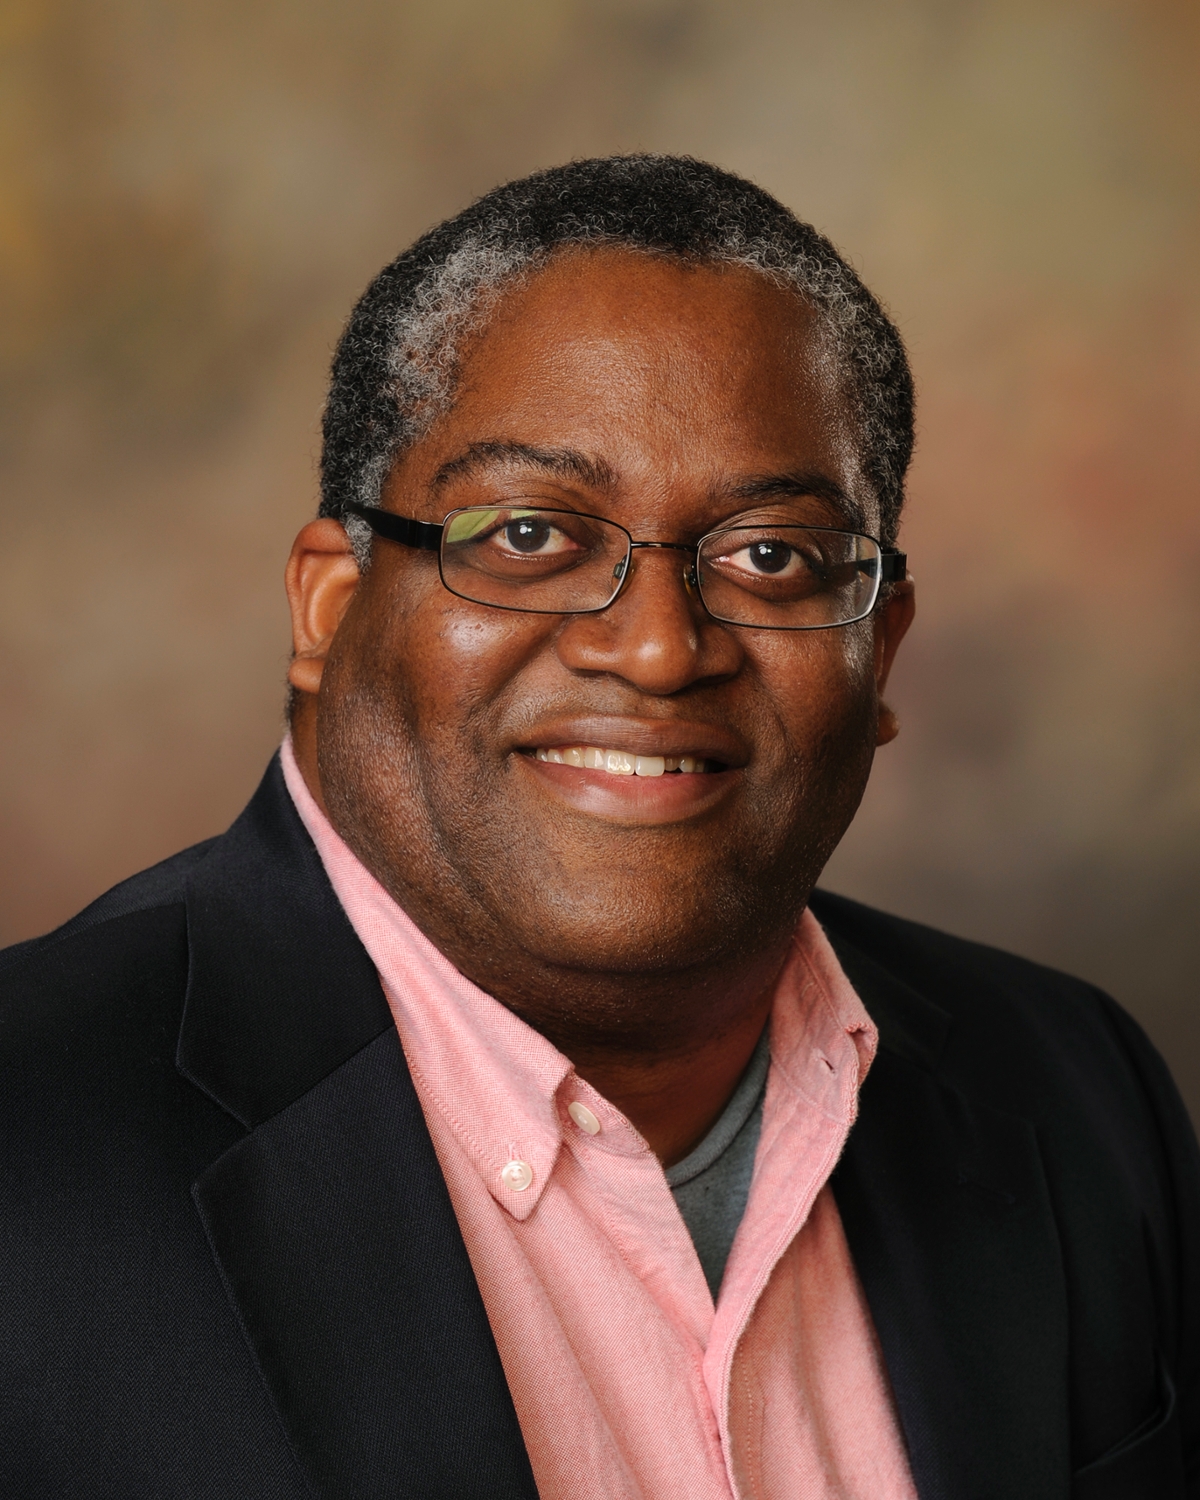 Edward Thomas, Associate Dean for Research and Graduate Studies